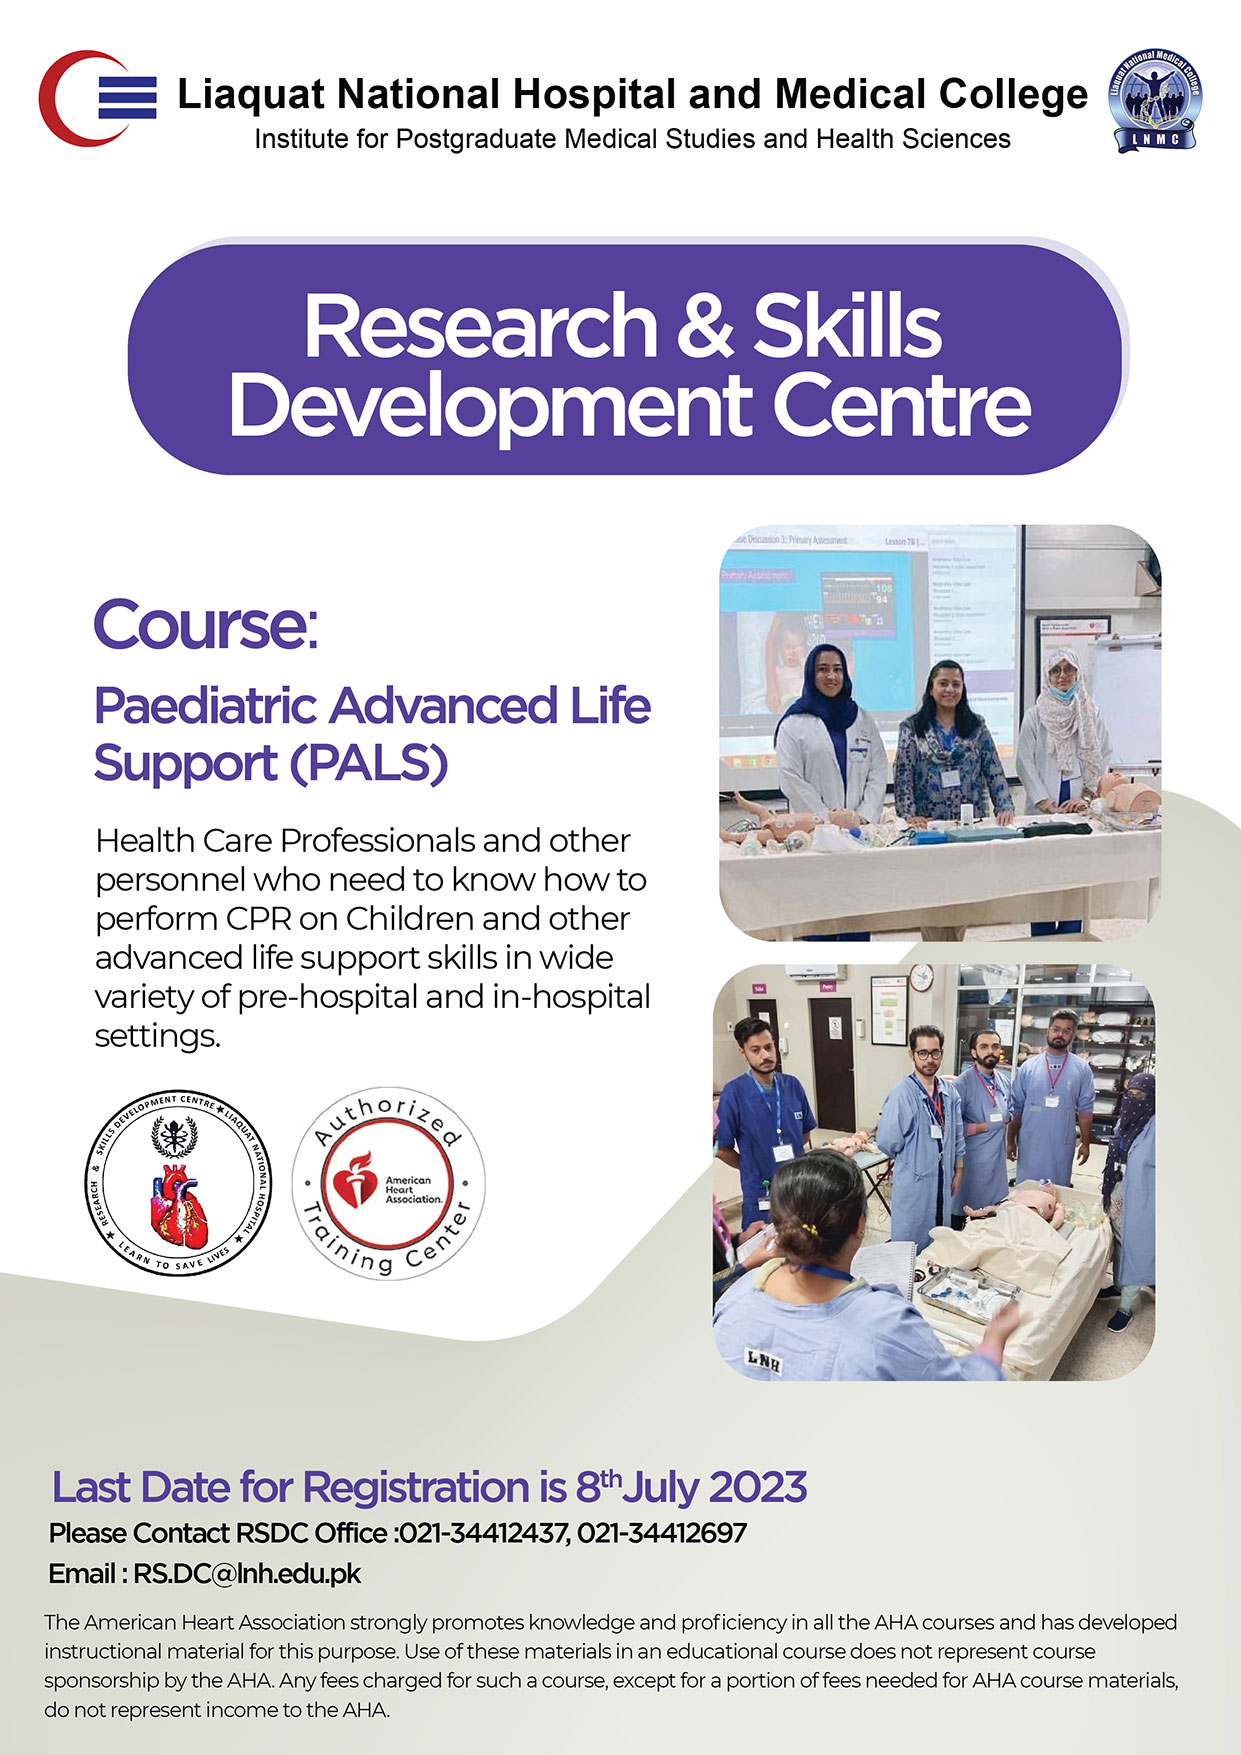 Paediatric Advanced Life Support Course (PALS)